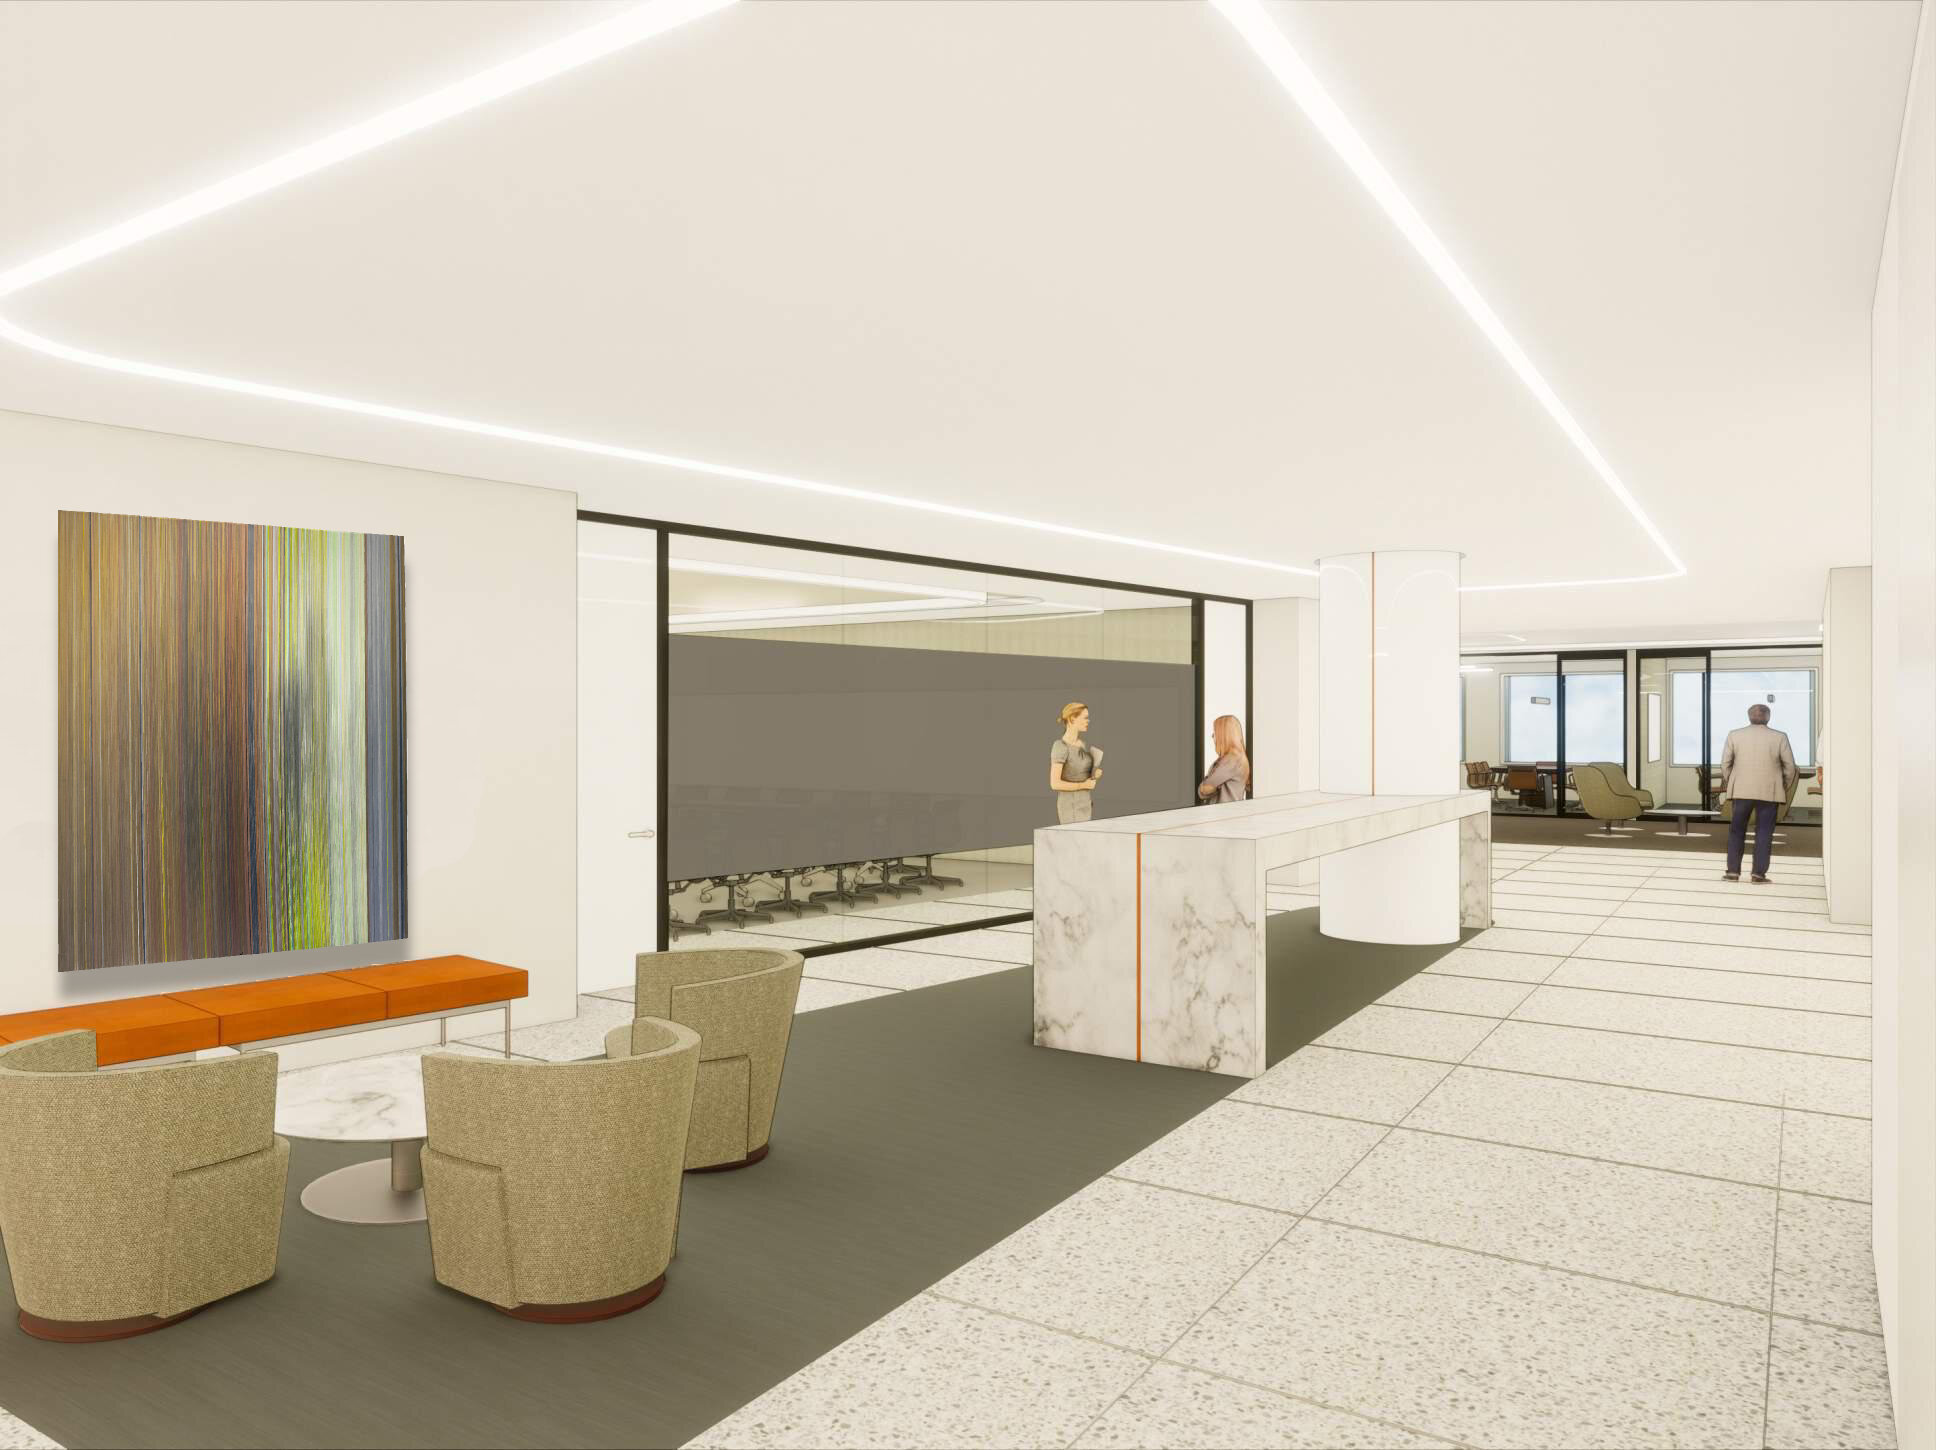 Rendering of Artwork During Construction Phase